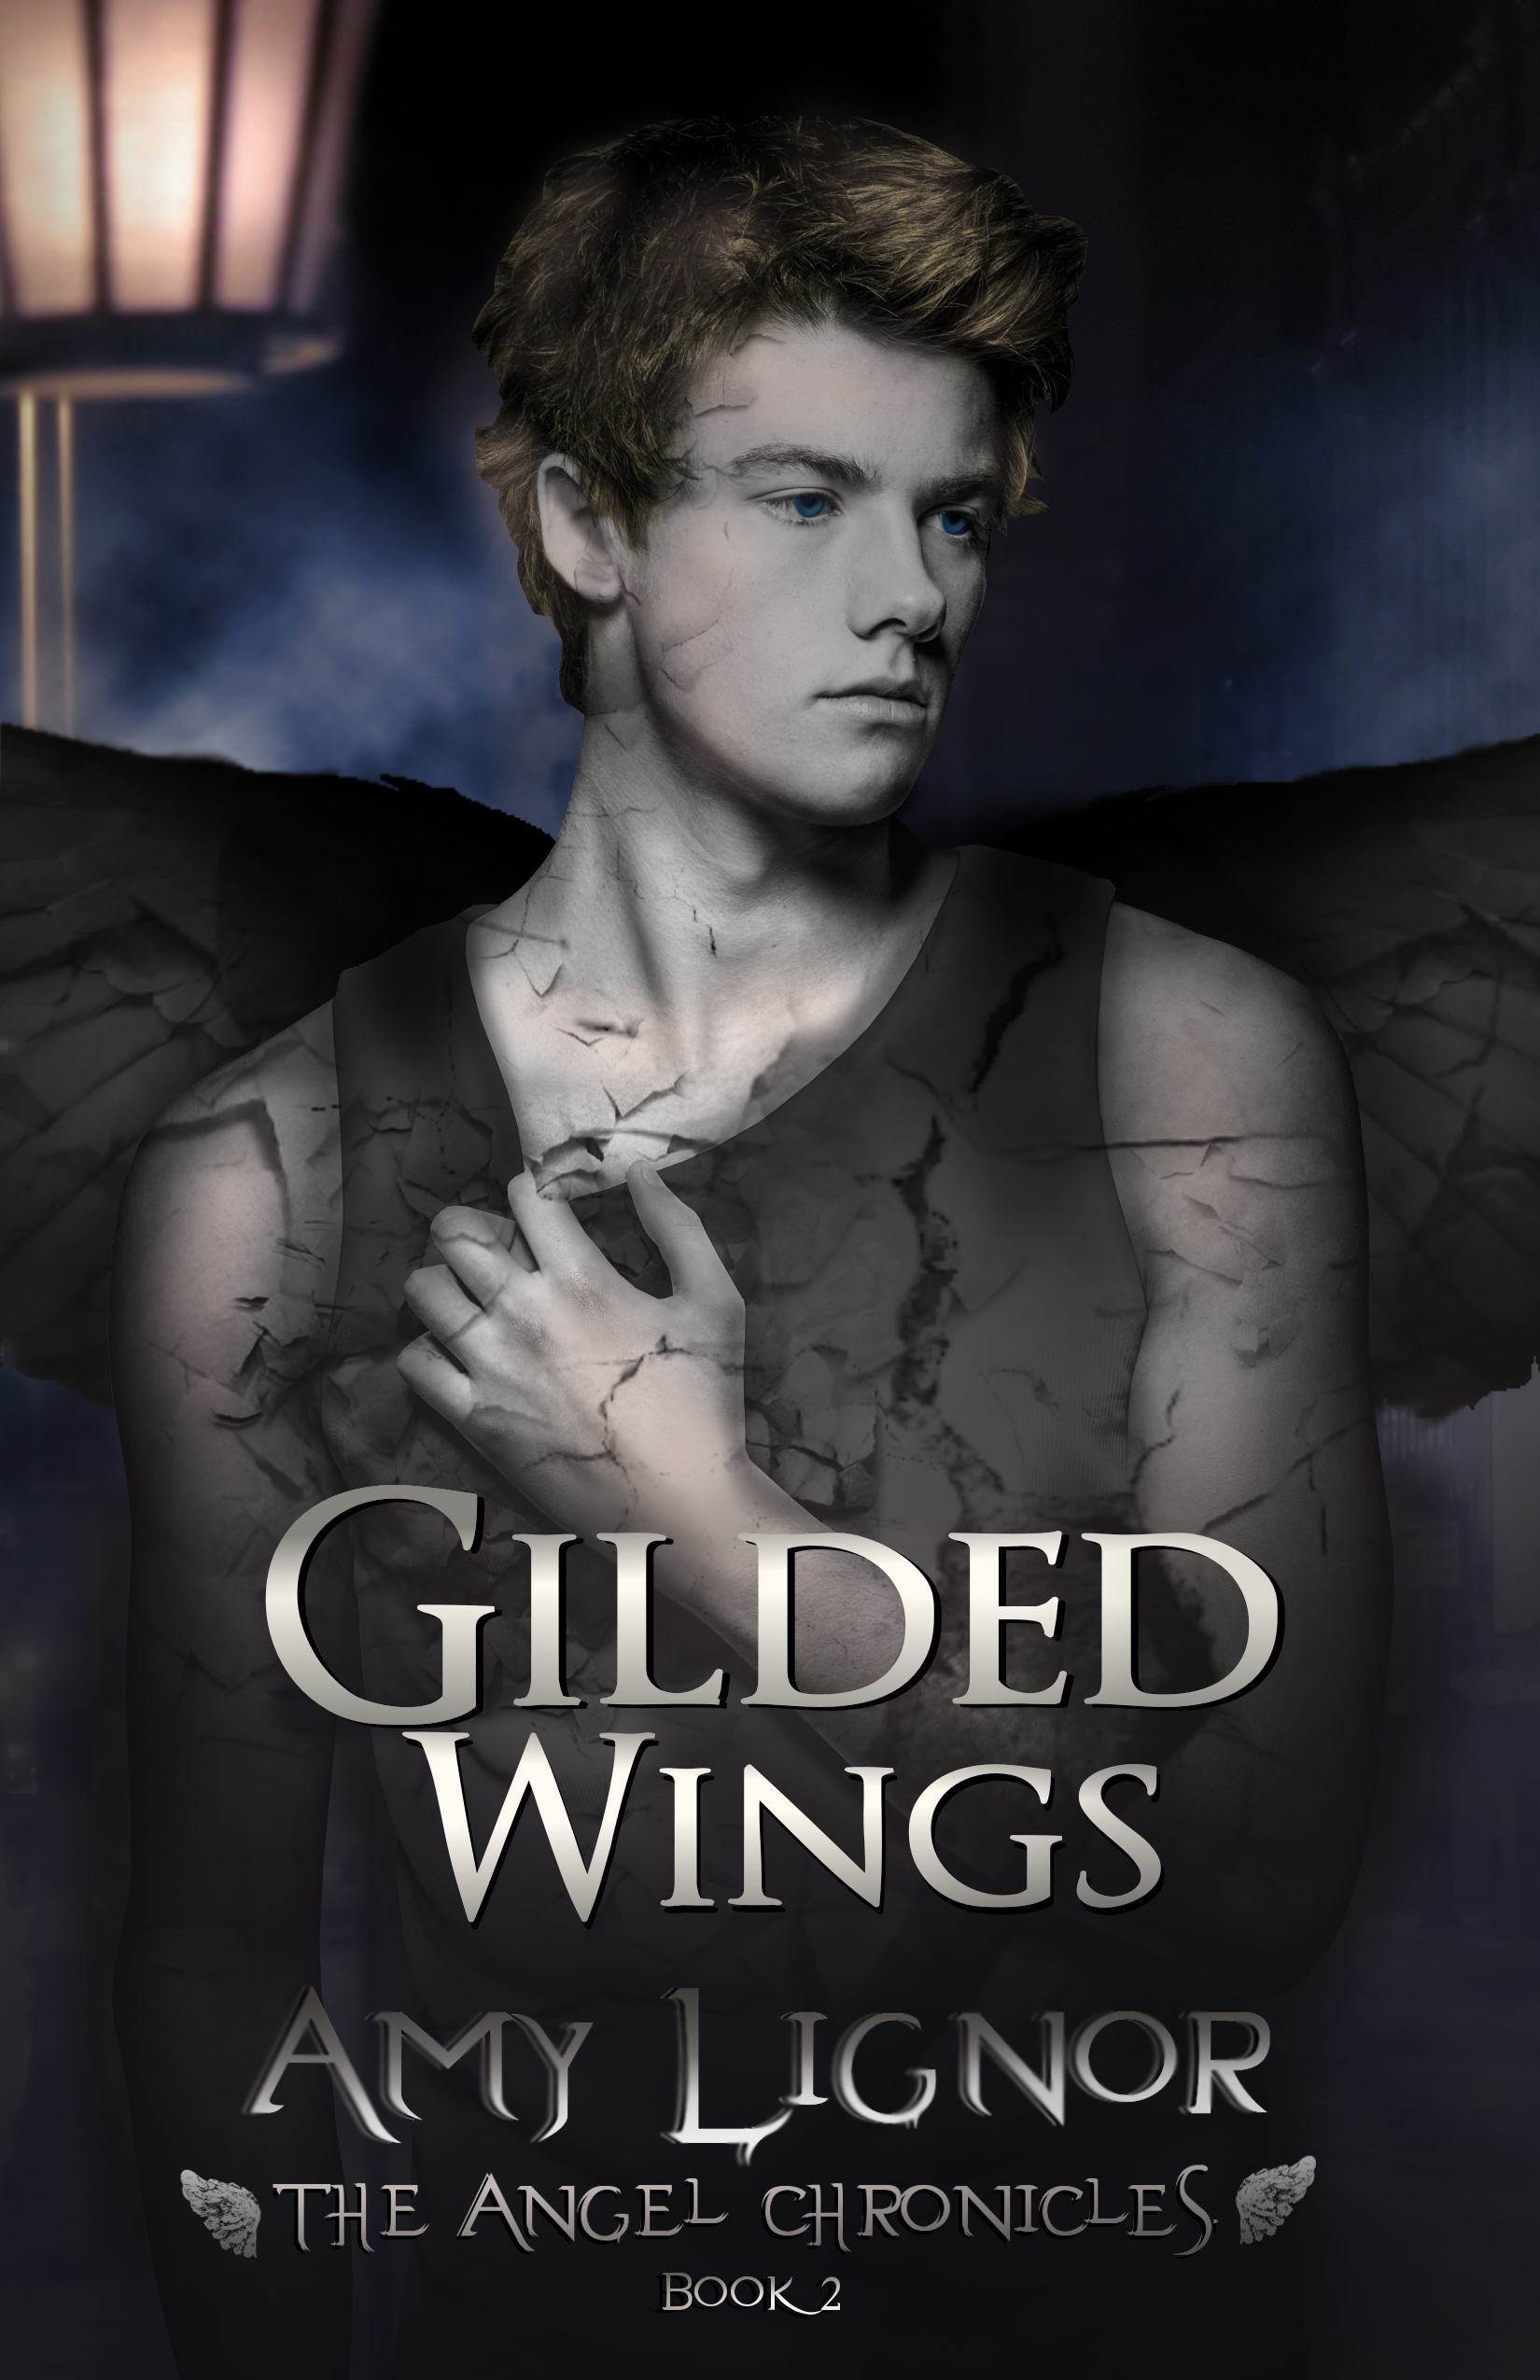 Gilded Wings: The Angel Chronicles, Book 2